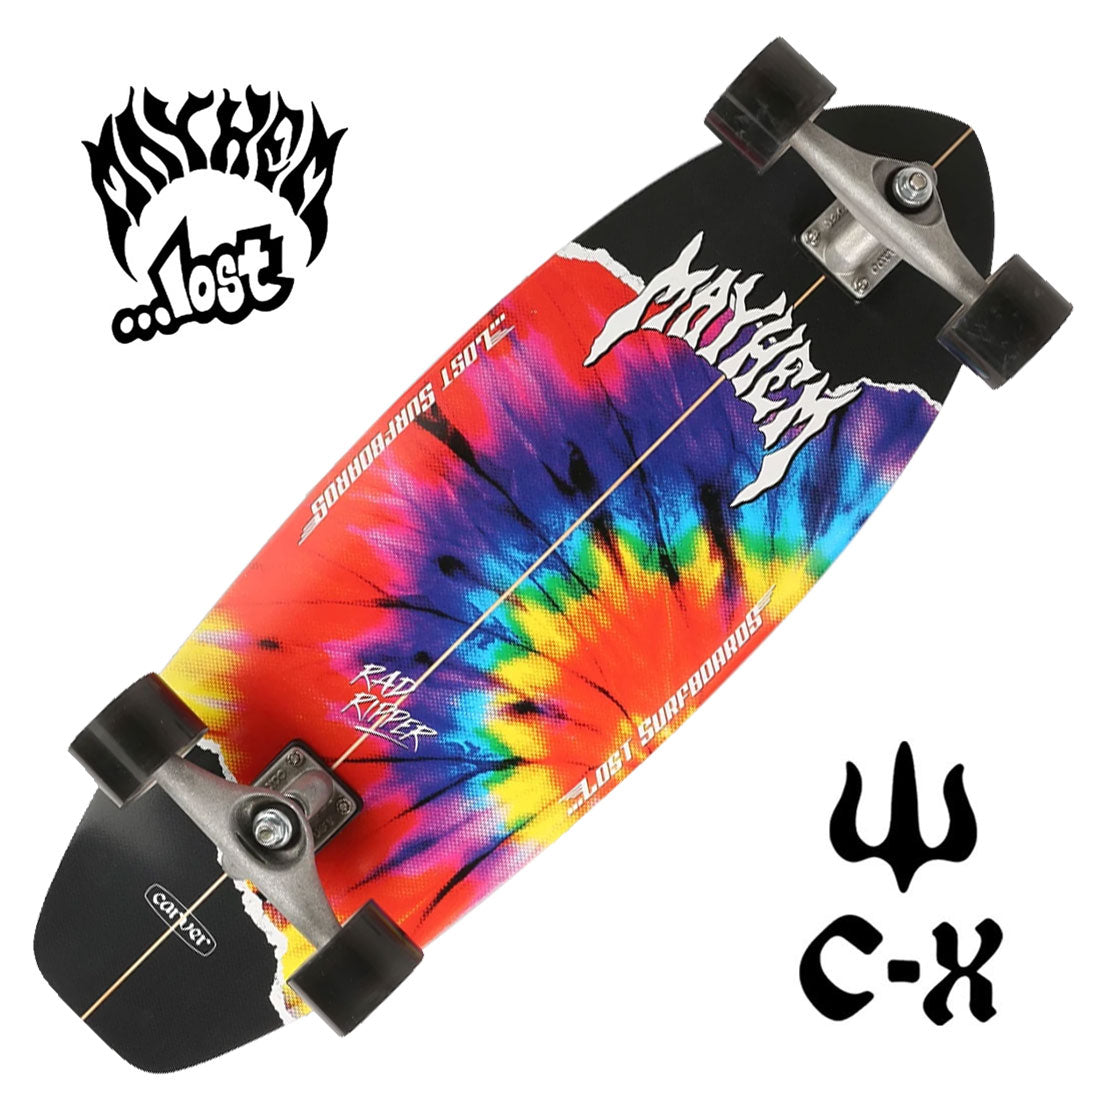 Carver x Lost Rad Ripper Tie Dye 31 Complete CX Skateboard Compl Carving and Specialty